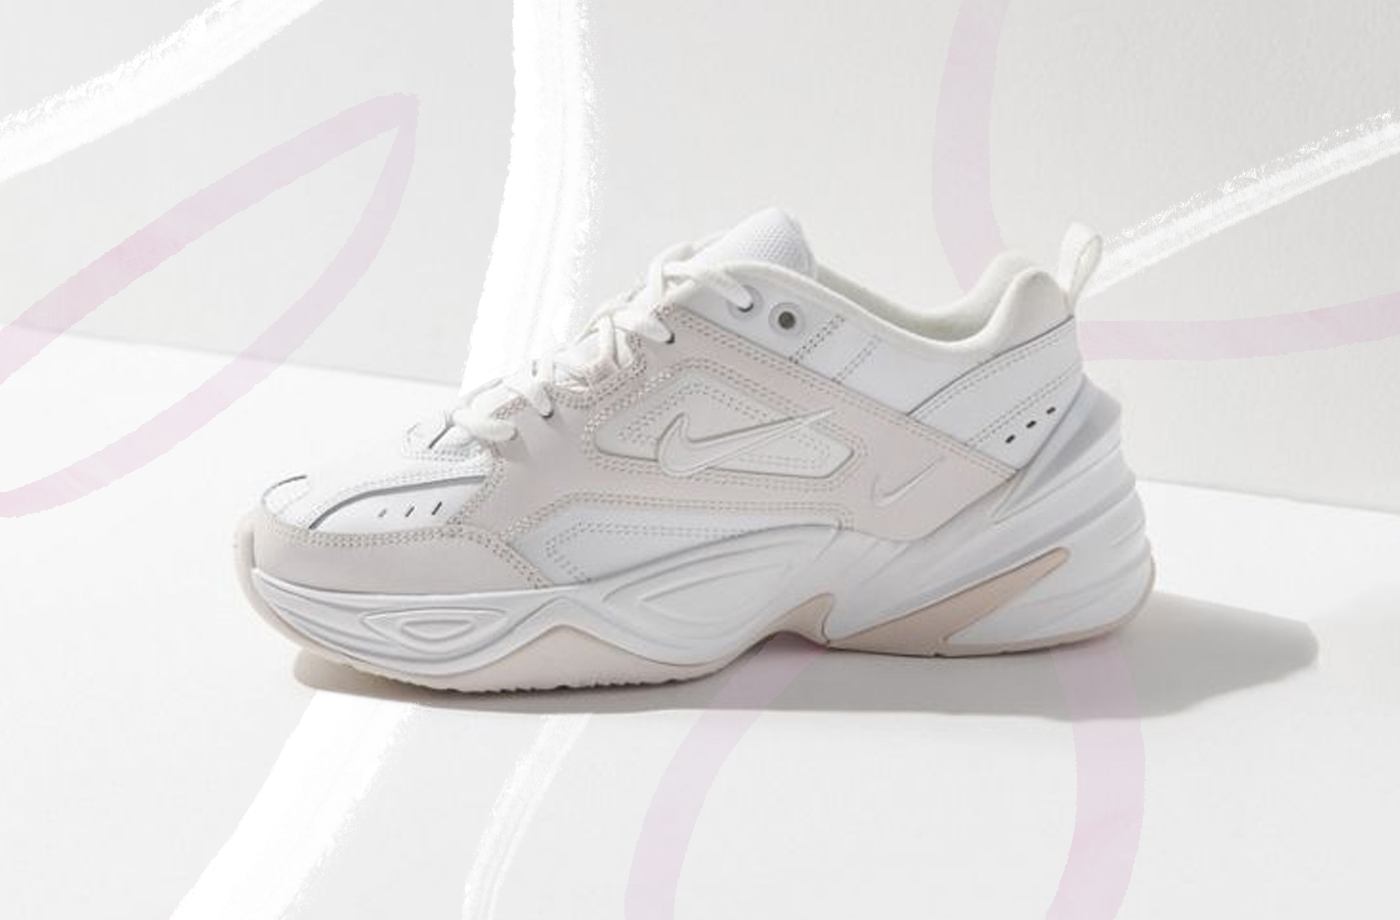 Nike M2K Tekno is queen of the top 